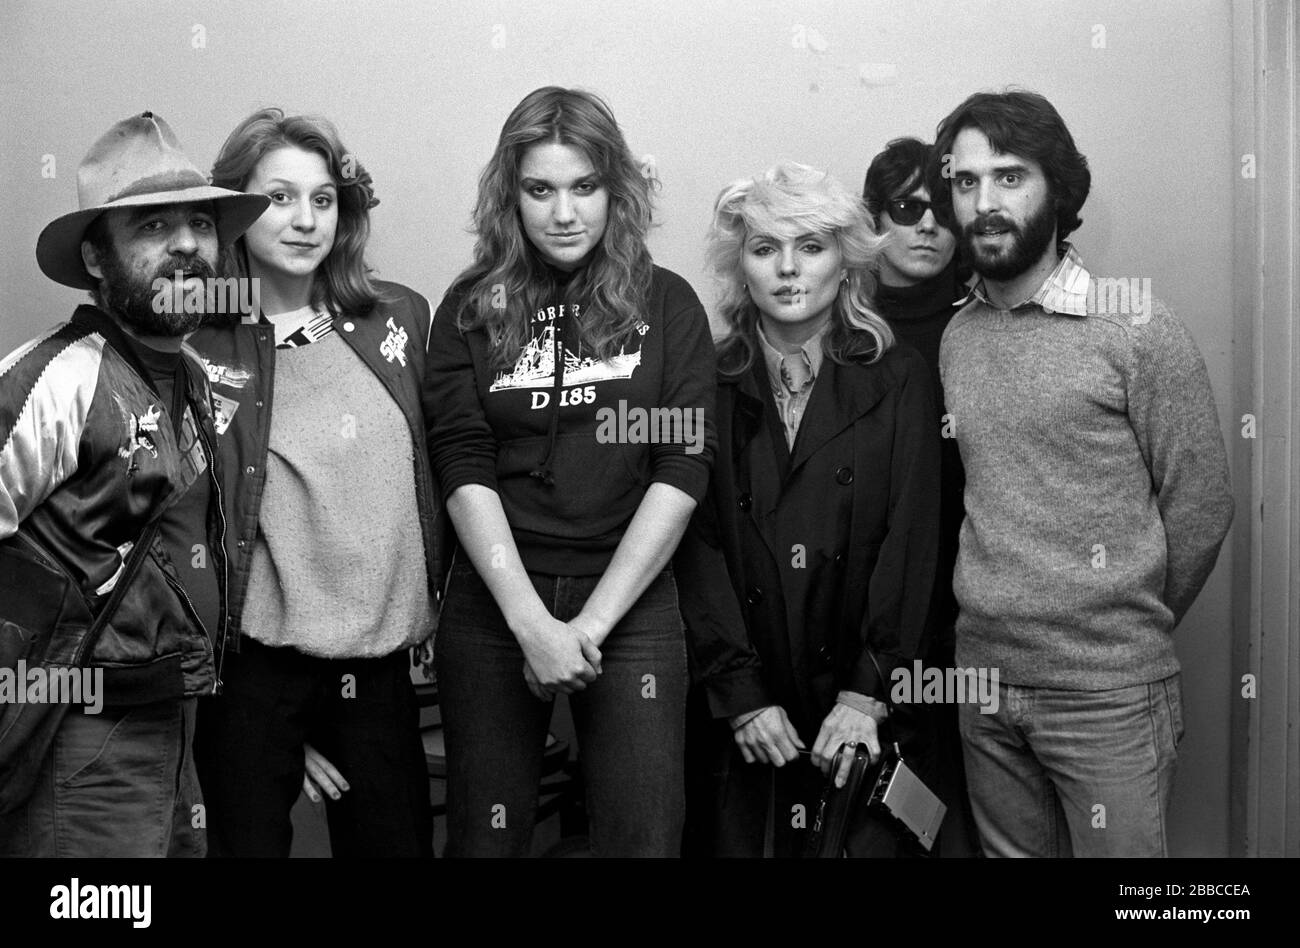 Debbie Harry of Blondie backstage at the Tower Theatre for a gig by The Runaways, The Ramones & The Jam. March 18, 1978. Credit: Scott Weiner / MediaPunch Stock Photo